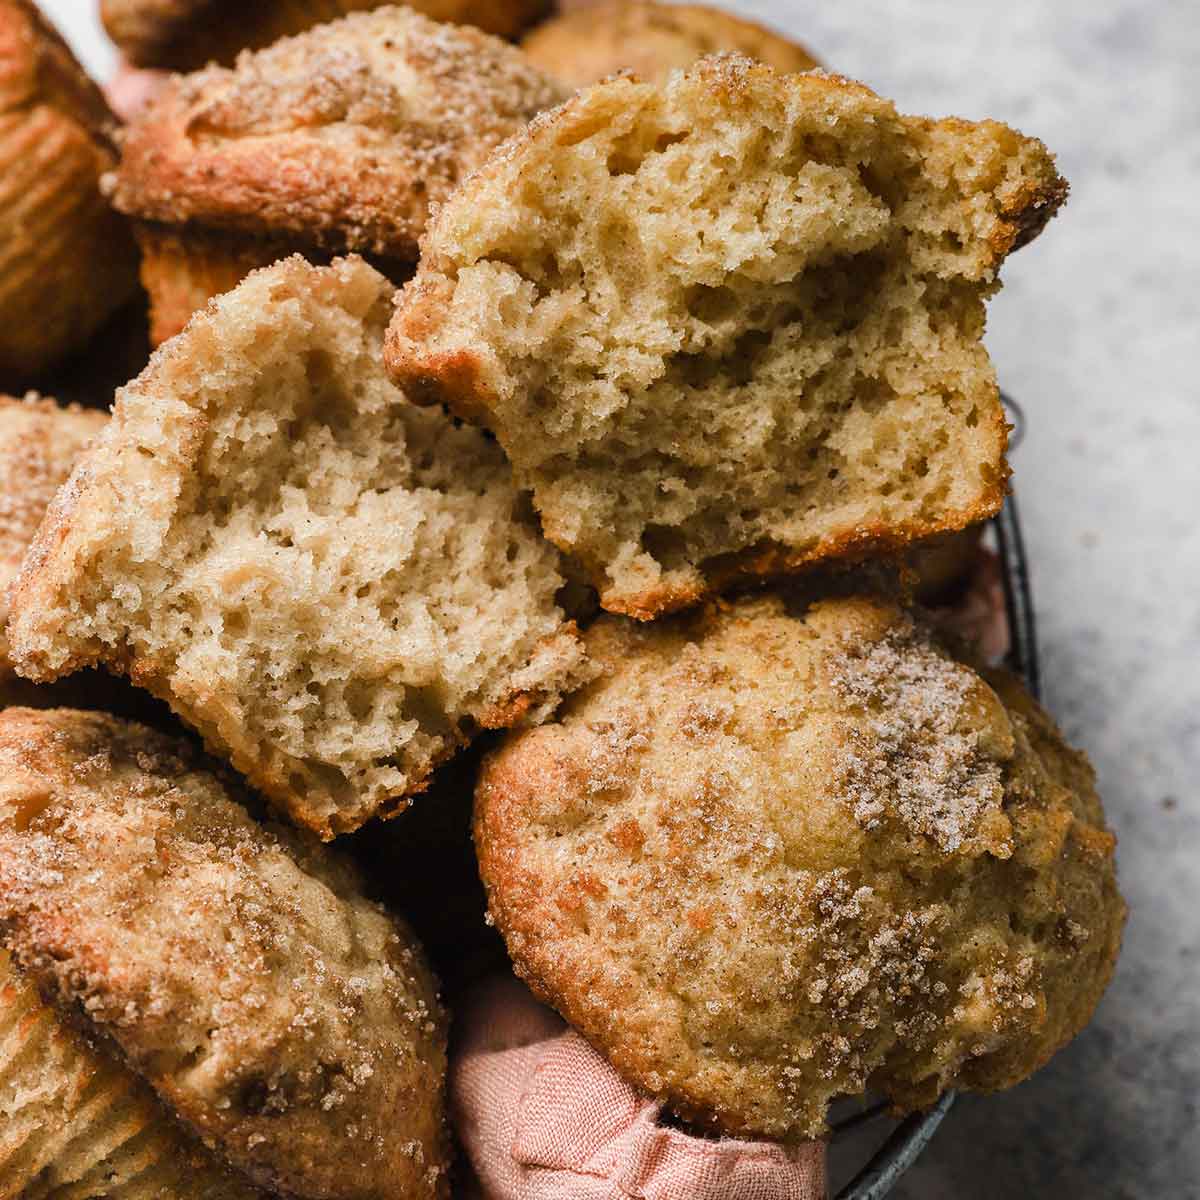 Apple cinnamon muffins in a basket lined with a pink napkin. One muffin is broken in half on top.